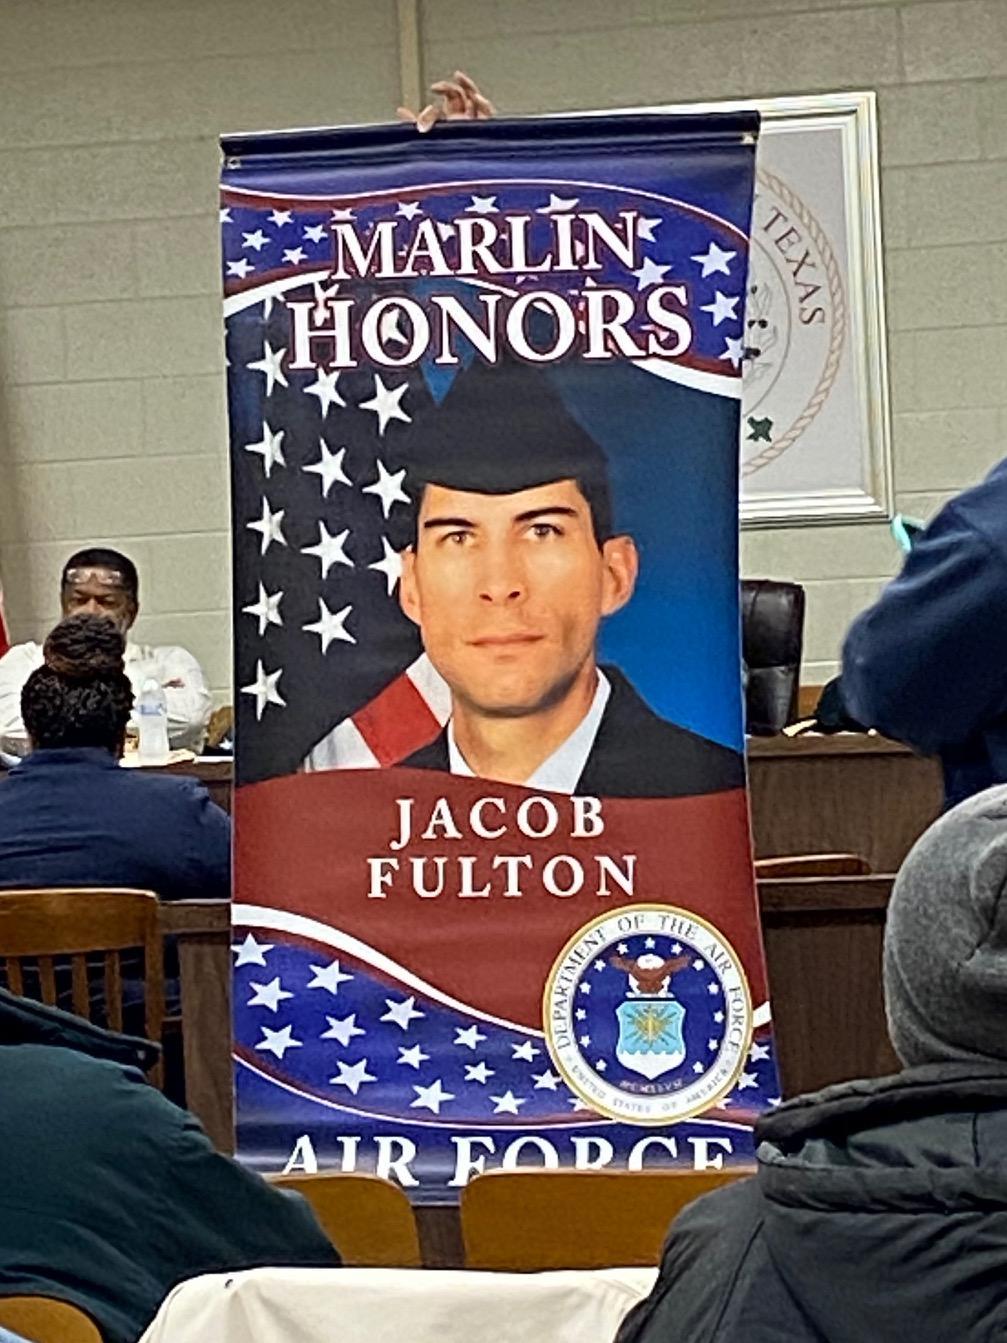 The Falls County Post 31 American Legion showed the Marlin City Council an already sponsored and completed banner.